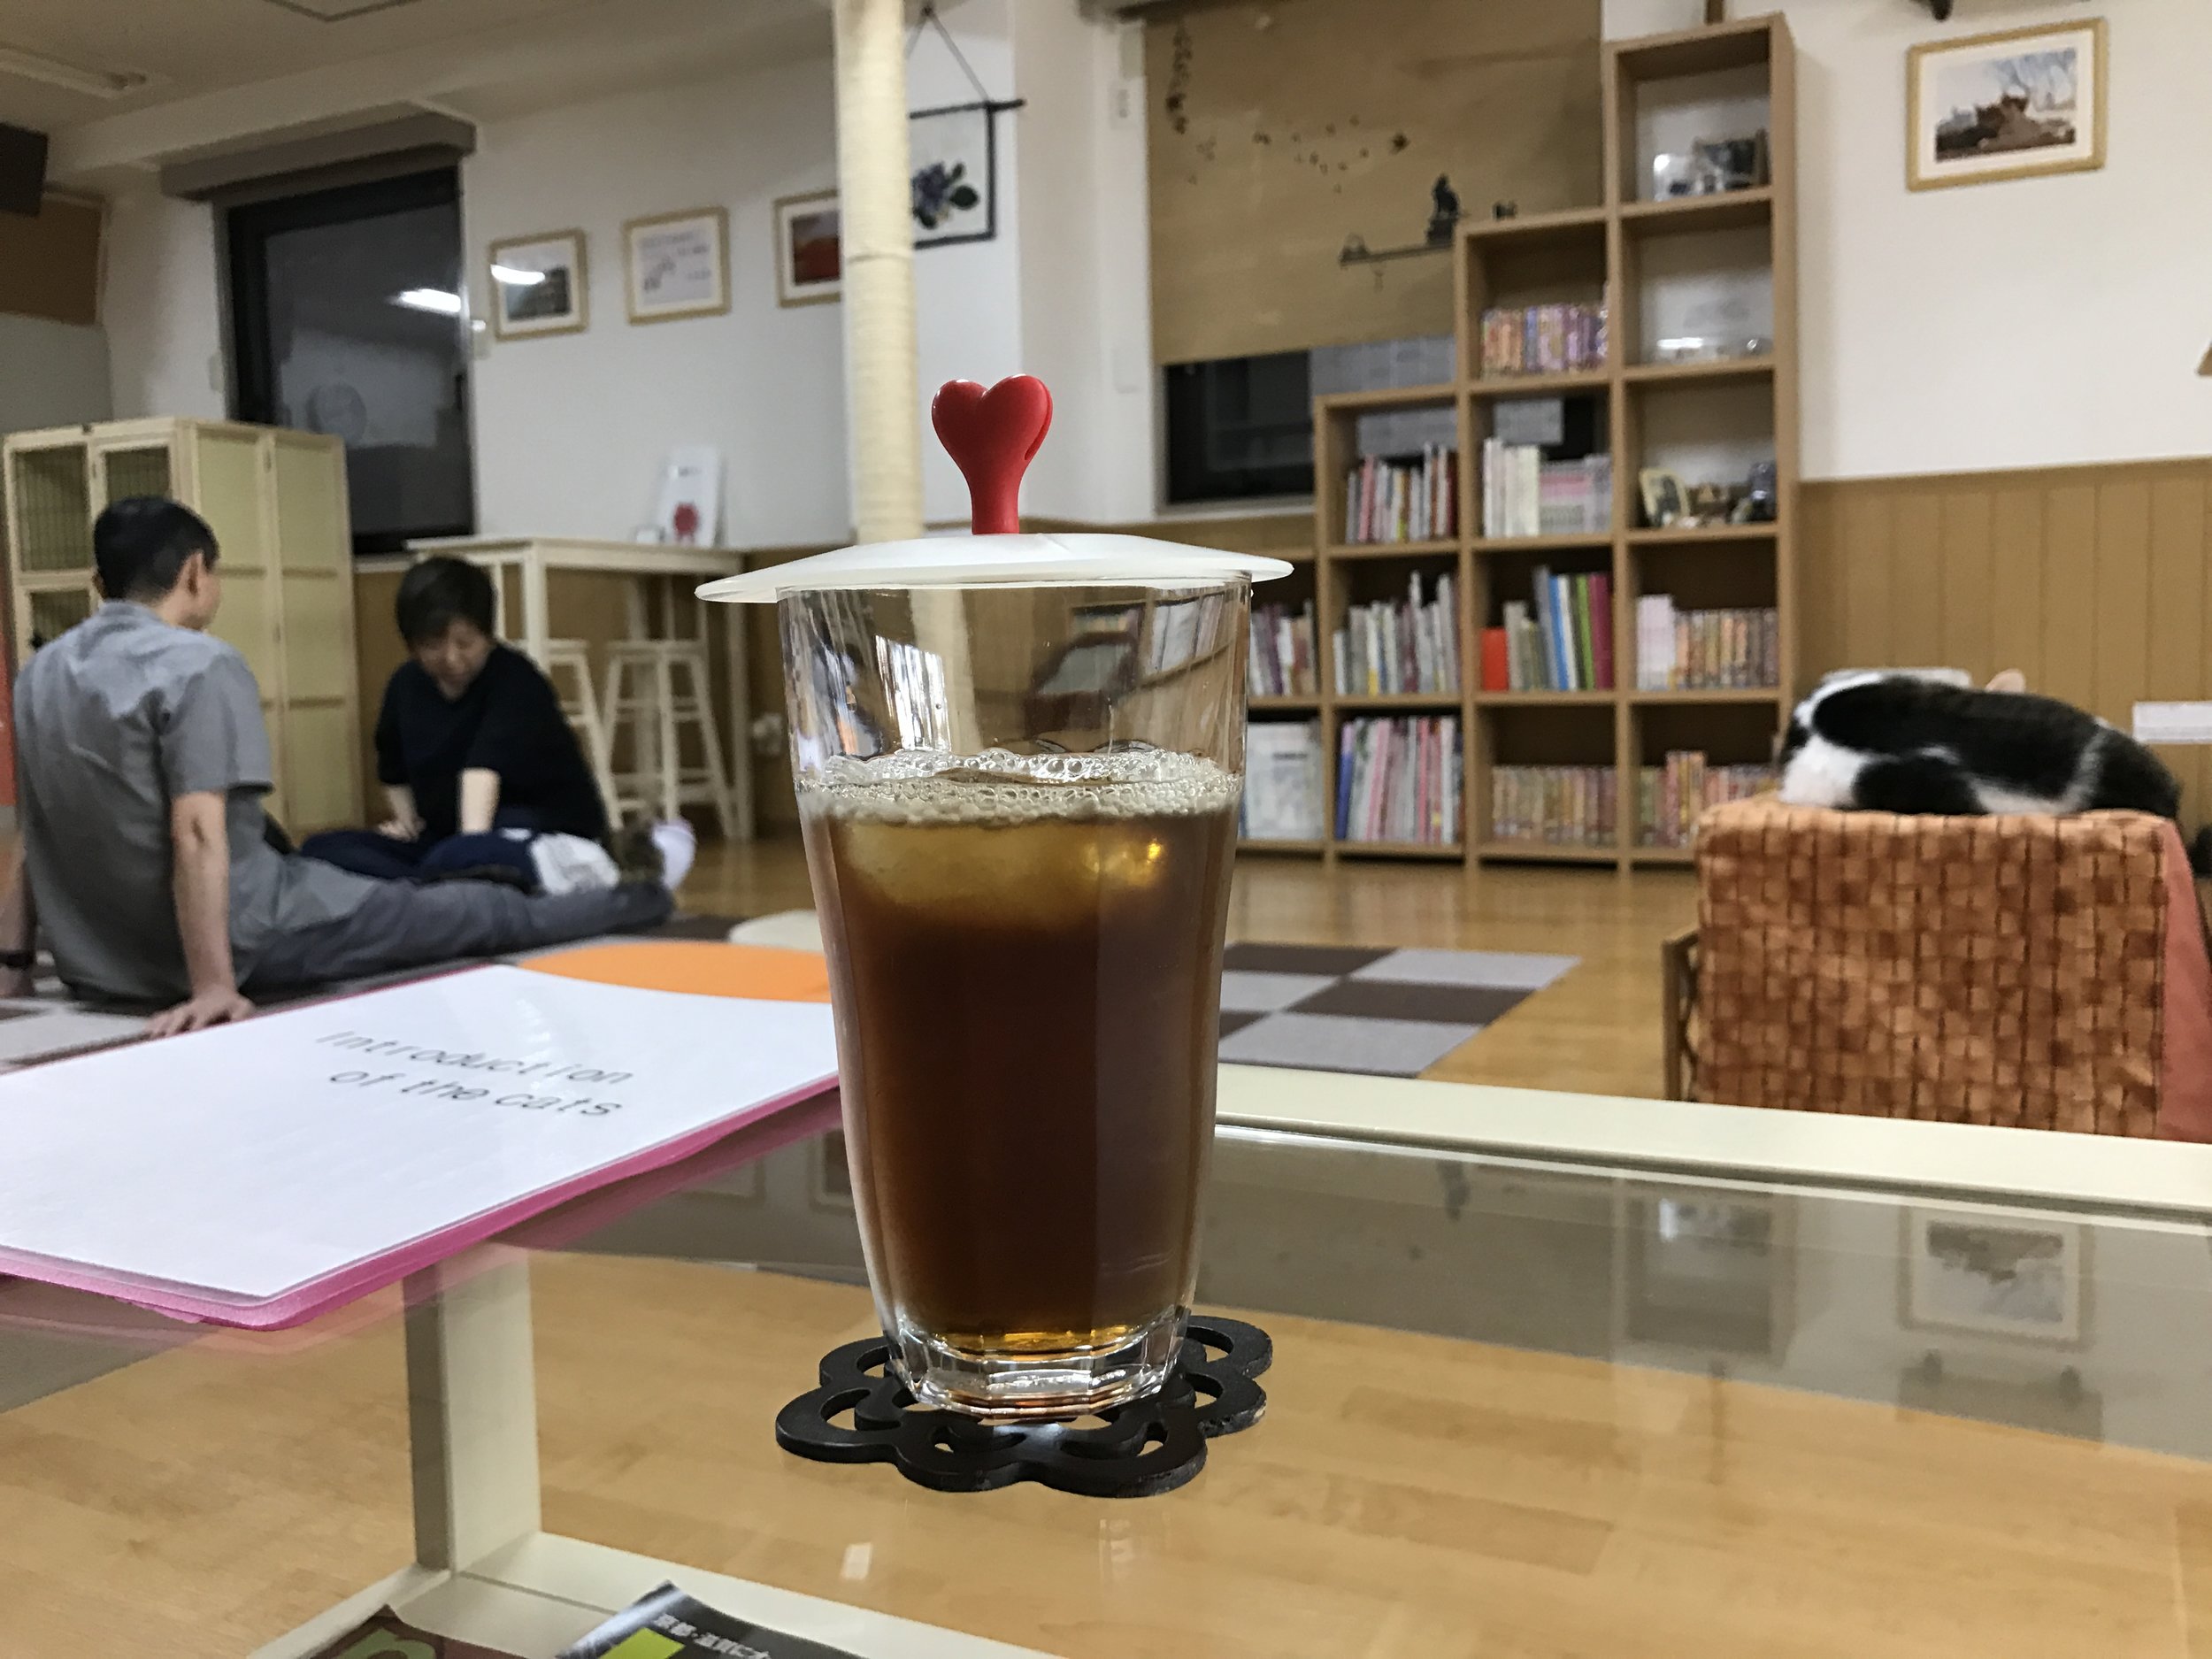 The cafe-style drinks are high quality at Cat Cafe Nekokaigi